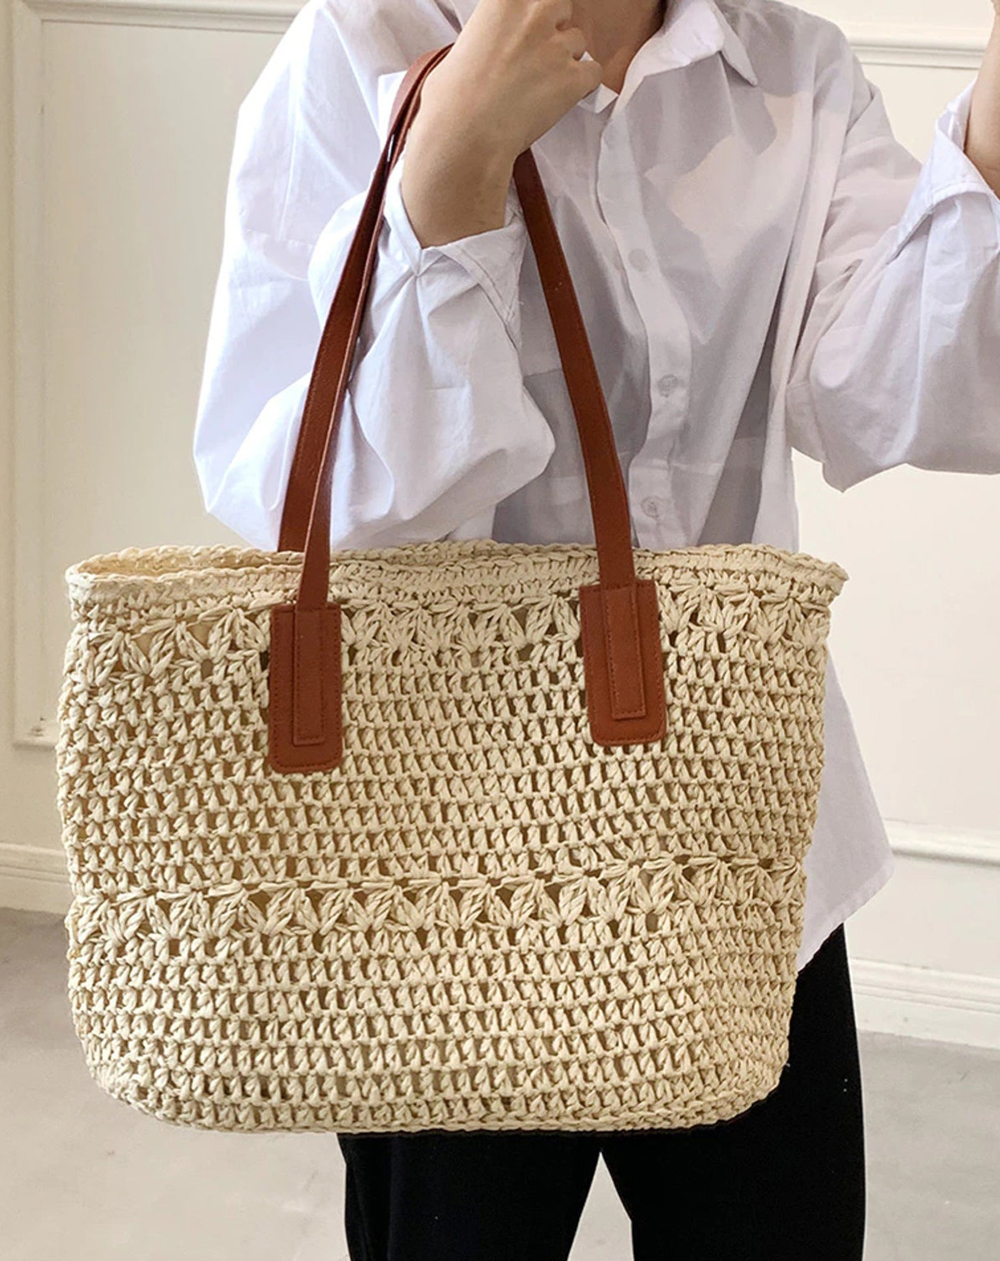 Woven Bags from Etsy